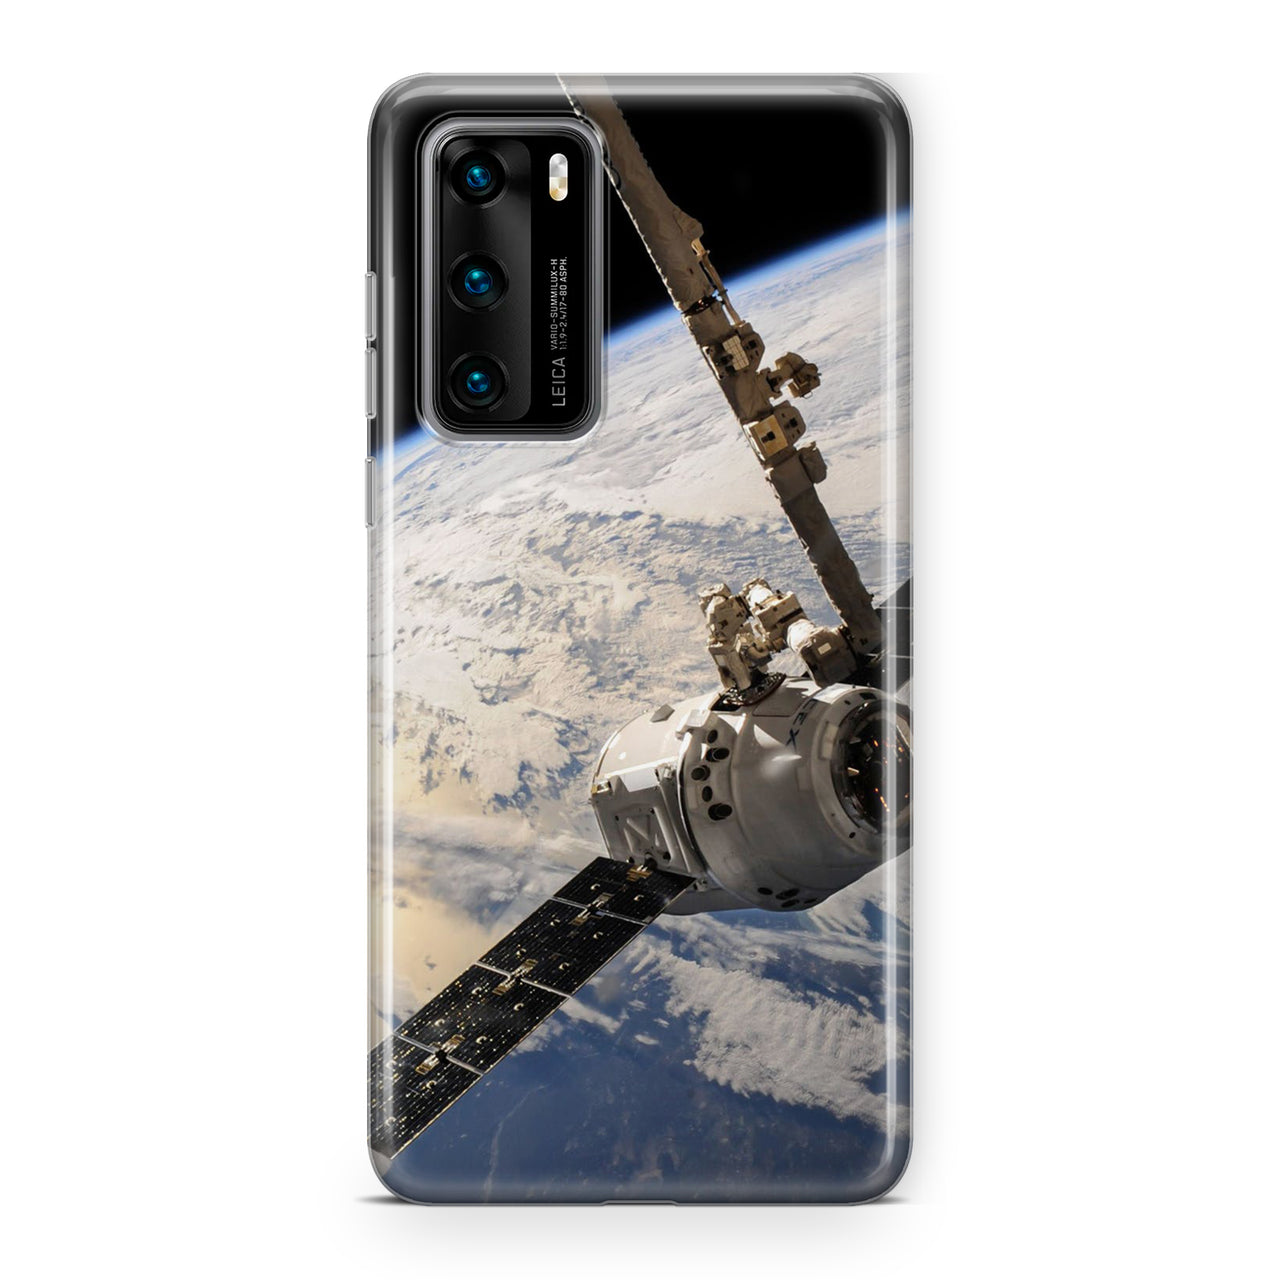 World View from Space Designed Huawei Cases